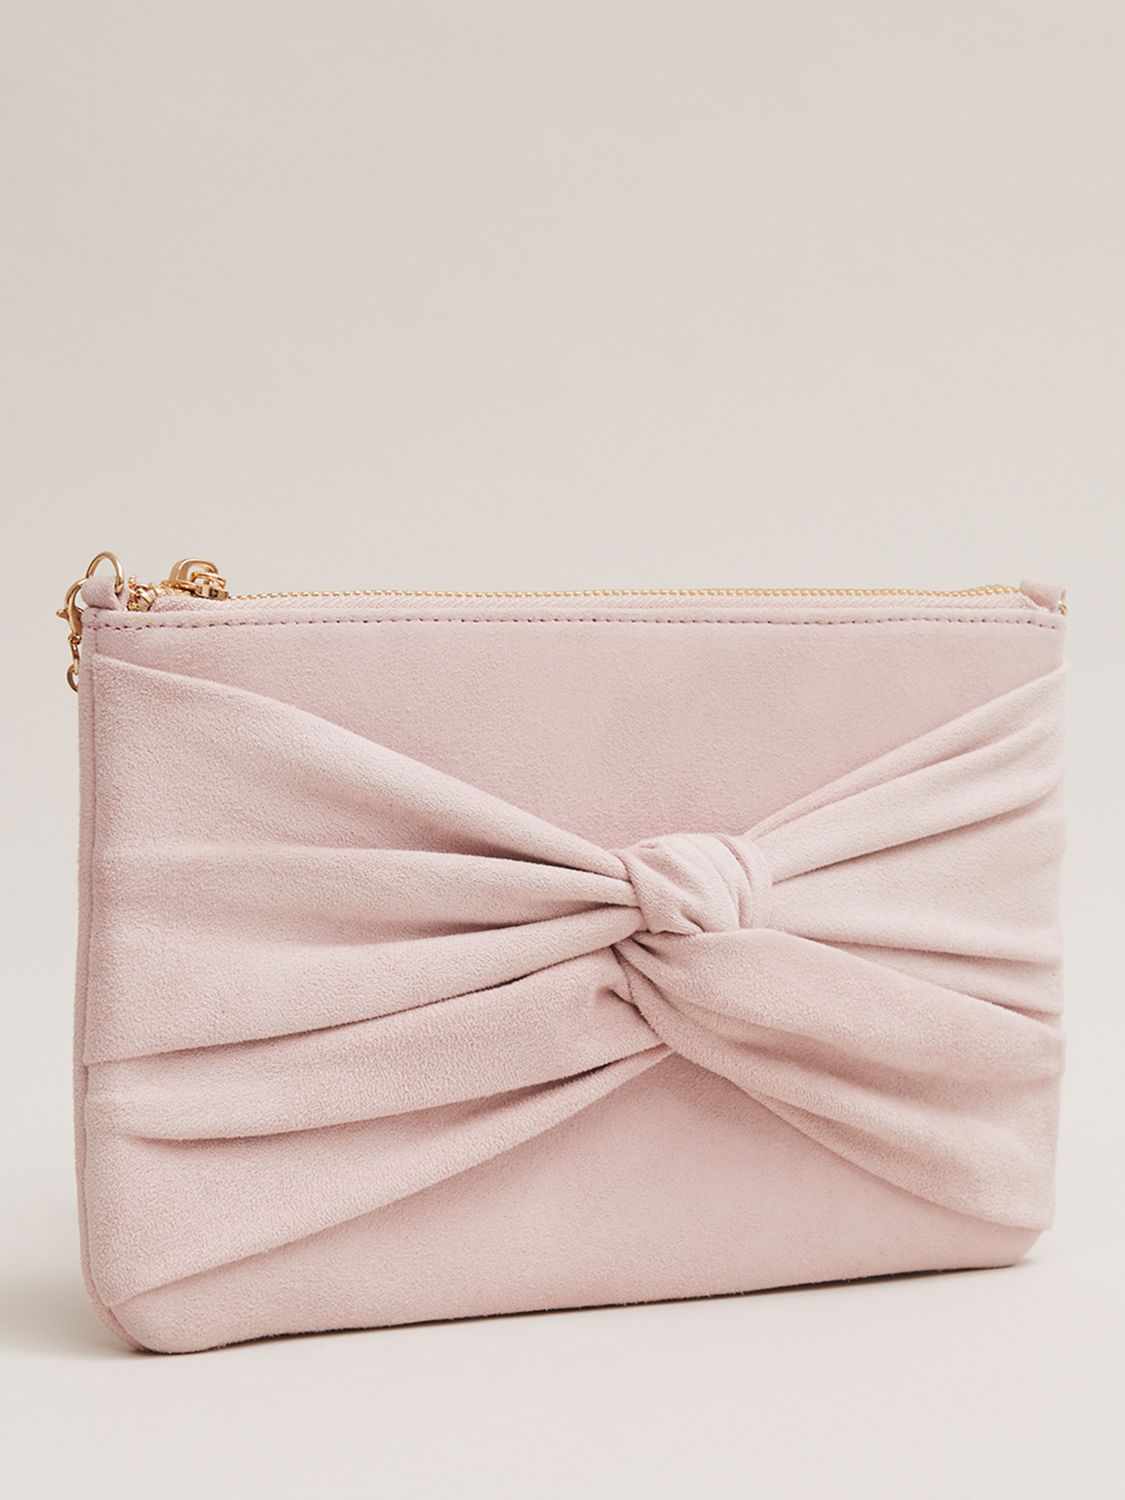 Phase Eight Suede Knot Front Clutch, Pale Pink, One Size